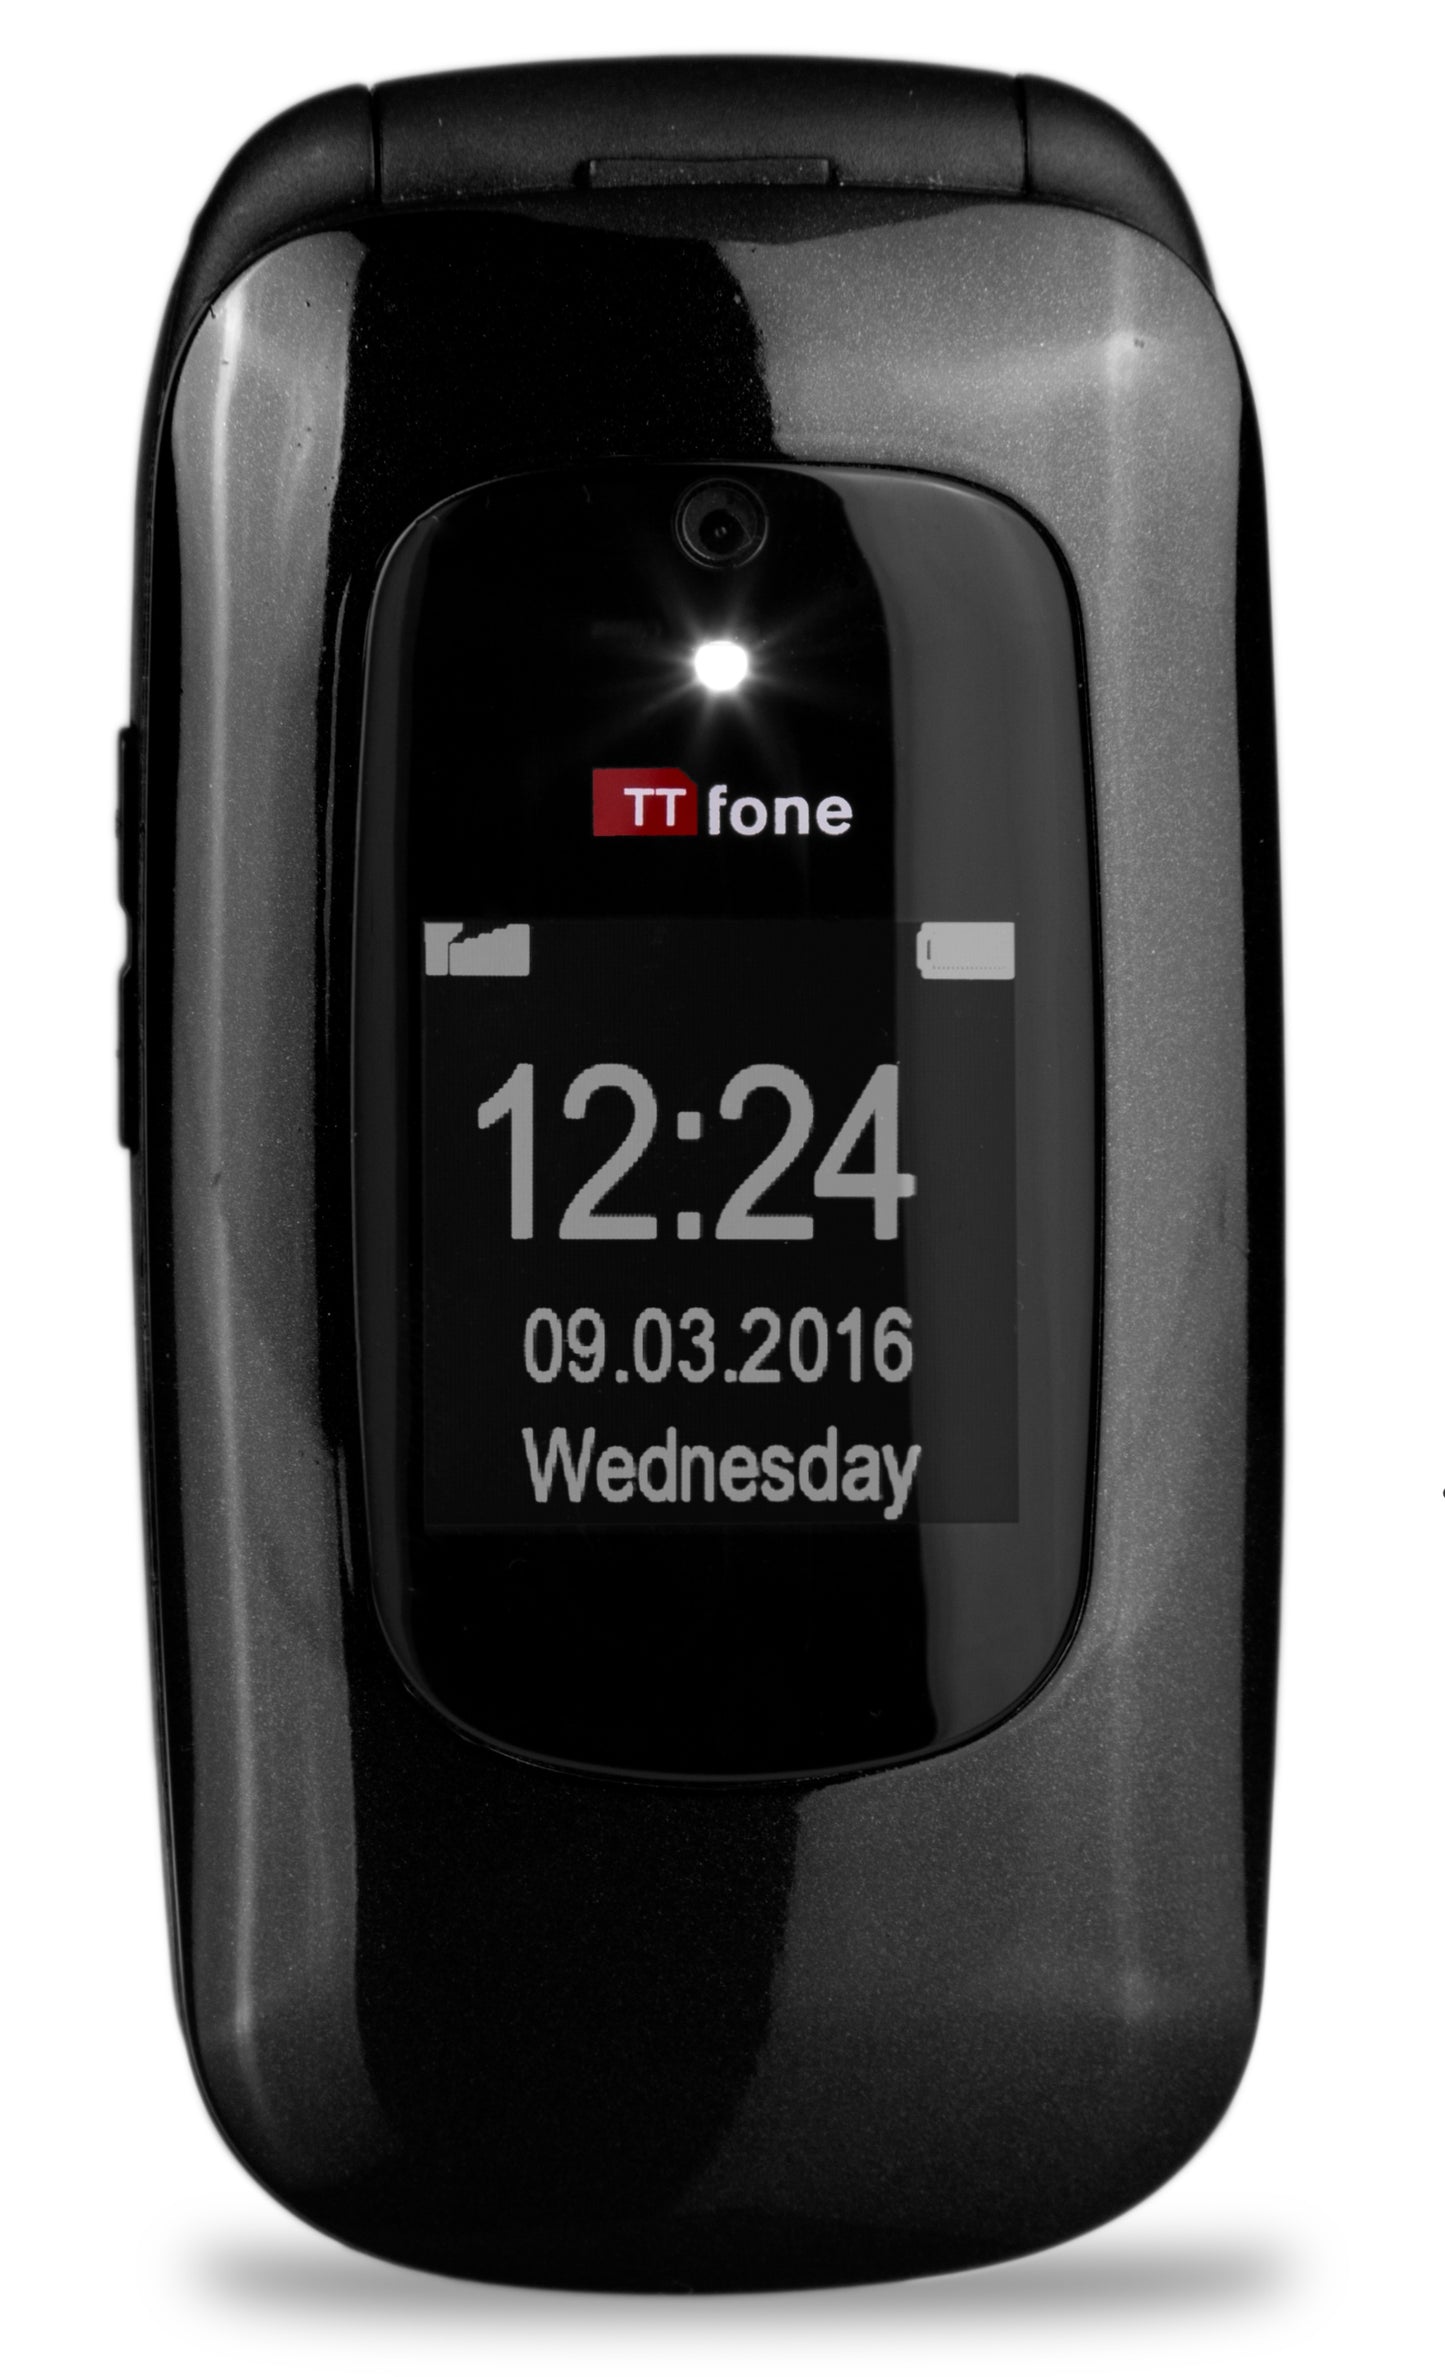 TTfone Black Lunar TT750 No Dock No Charger - Warehouse Deals with EE Pay As You Go